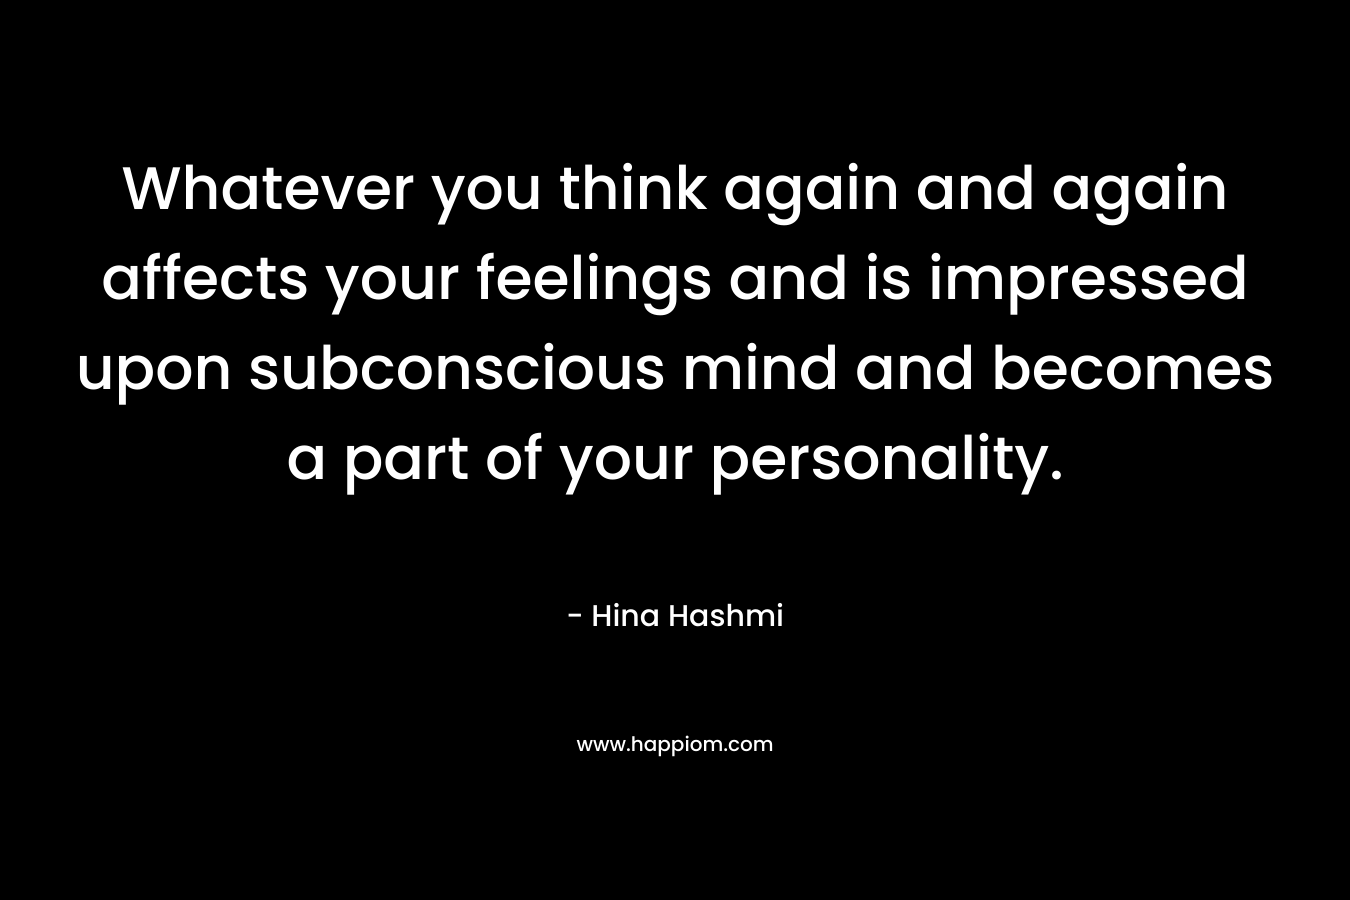 Whatever you think again and again affects your feelings and is impressed upon subconscious mind and becomes a part of your personality.